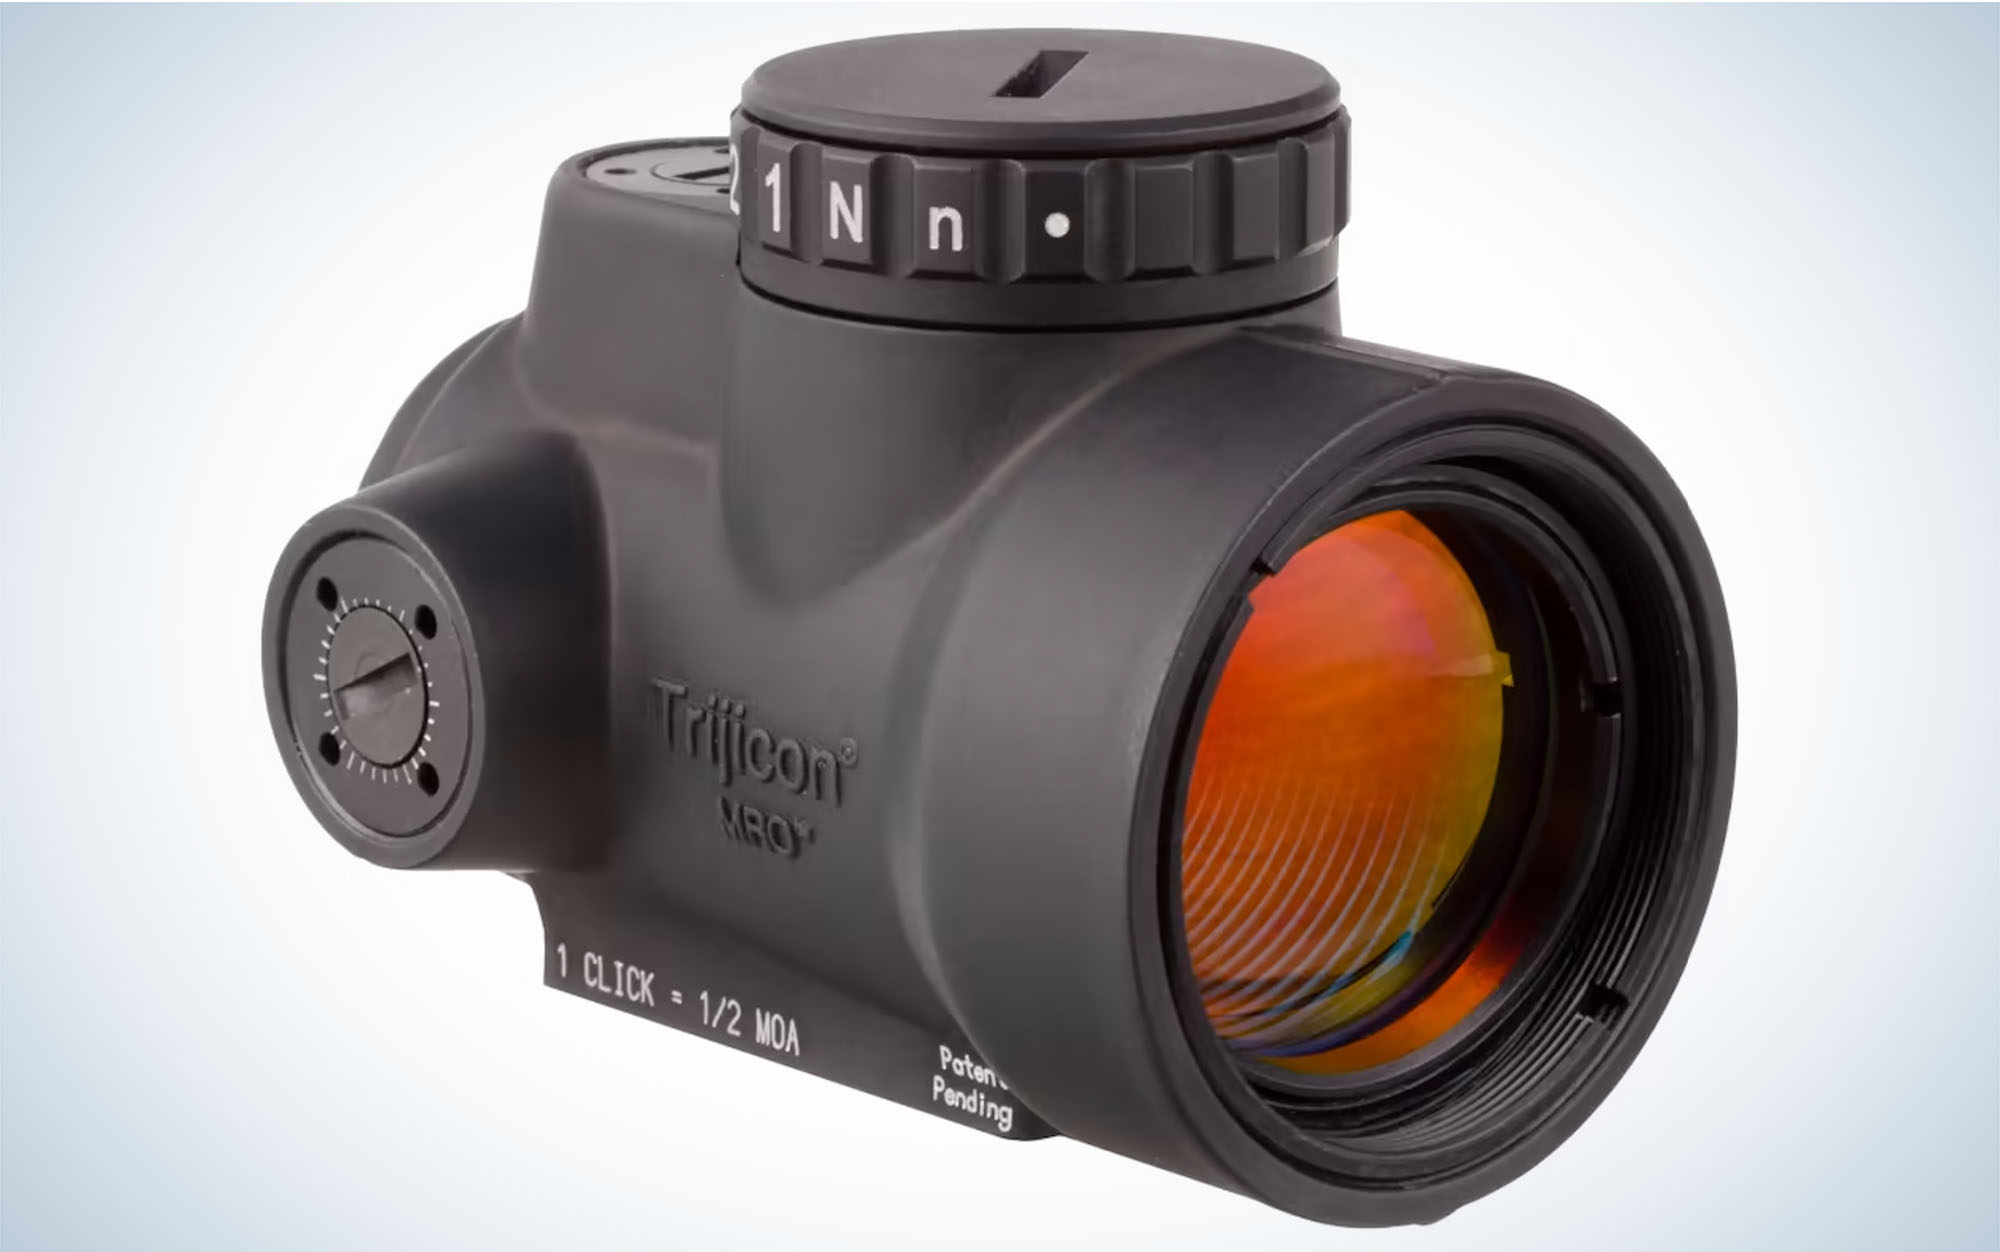 The Trijicon MRO is the best overall red dot sight for turkey hunting.